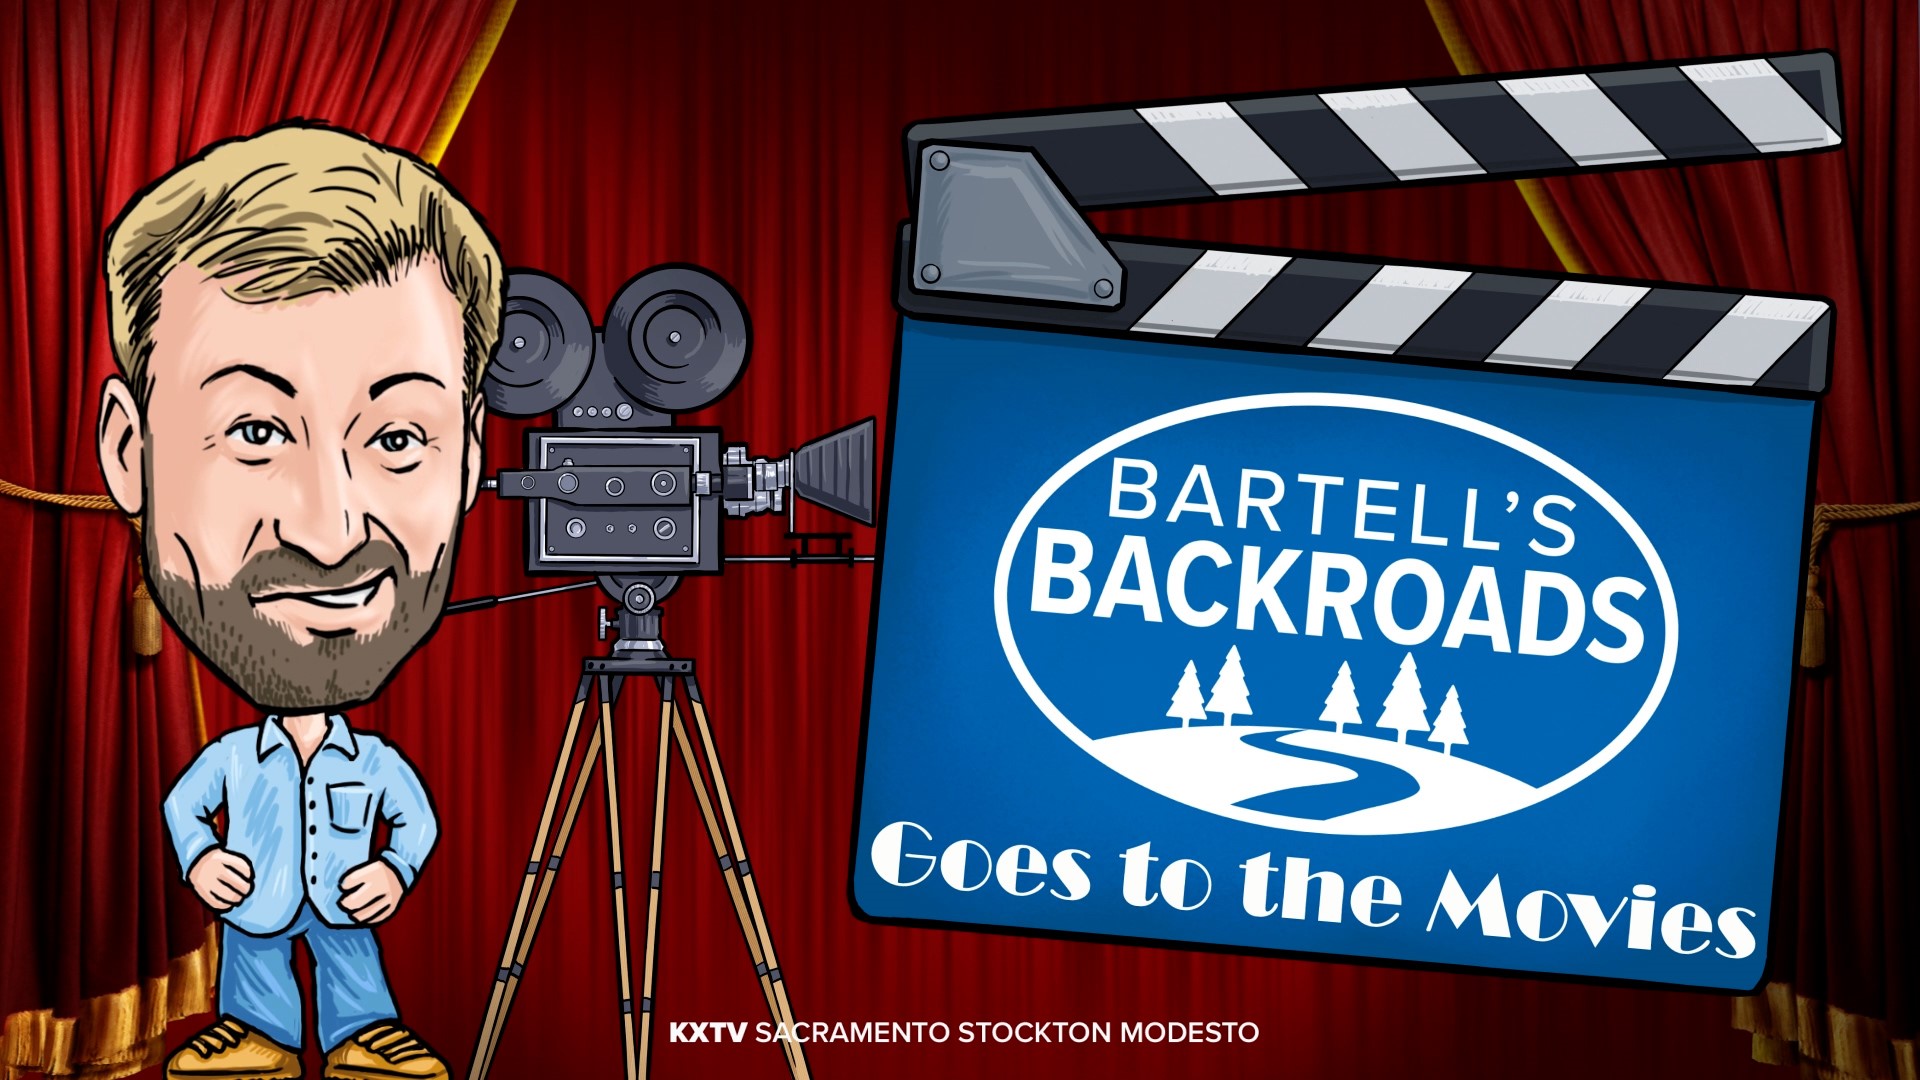 John Bartell hosts a special celebration of some of Hollywood's most memorable movies and the towns across California where they were filmed.